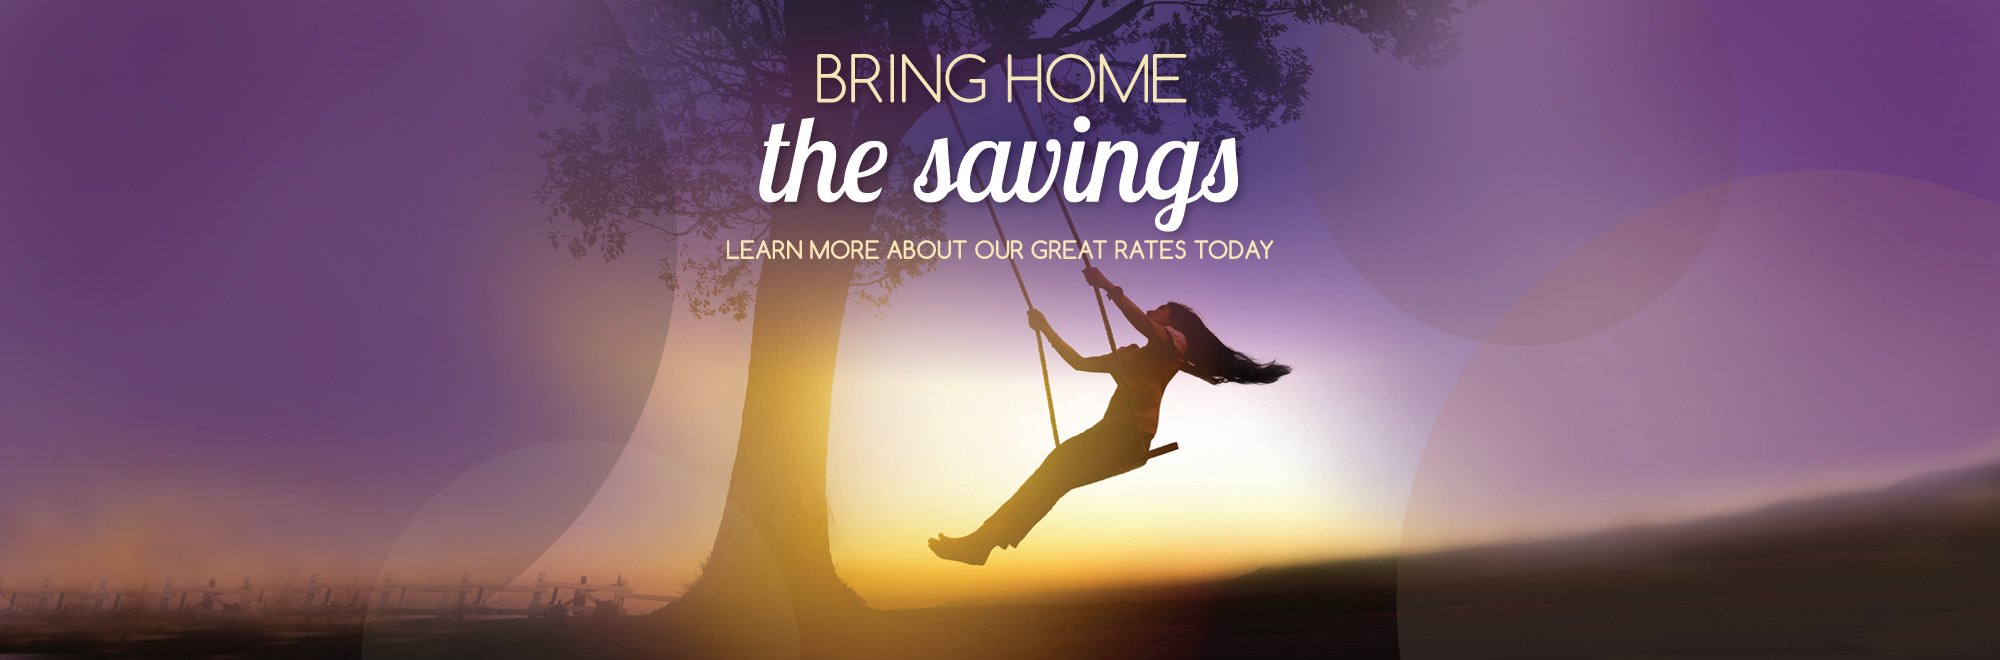 Bring Home the Savings banner